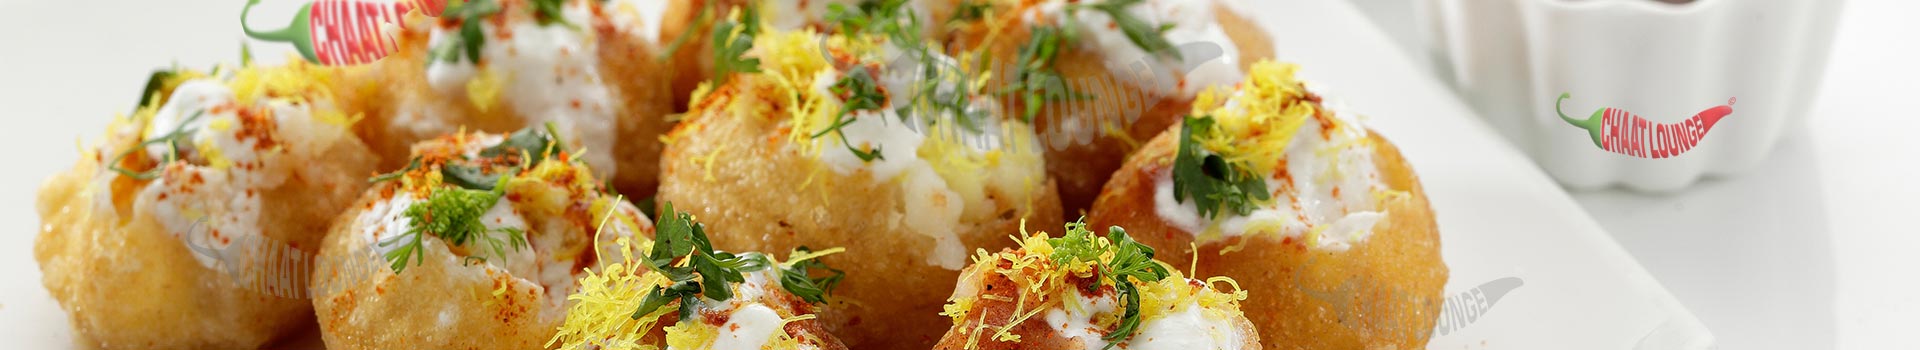 Chaat Franchise Concept In India, Chaat Lounge Franchise Company, Chaat Franchise